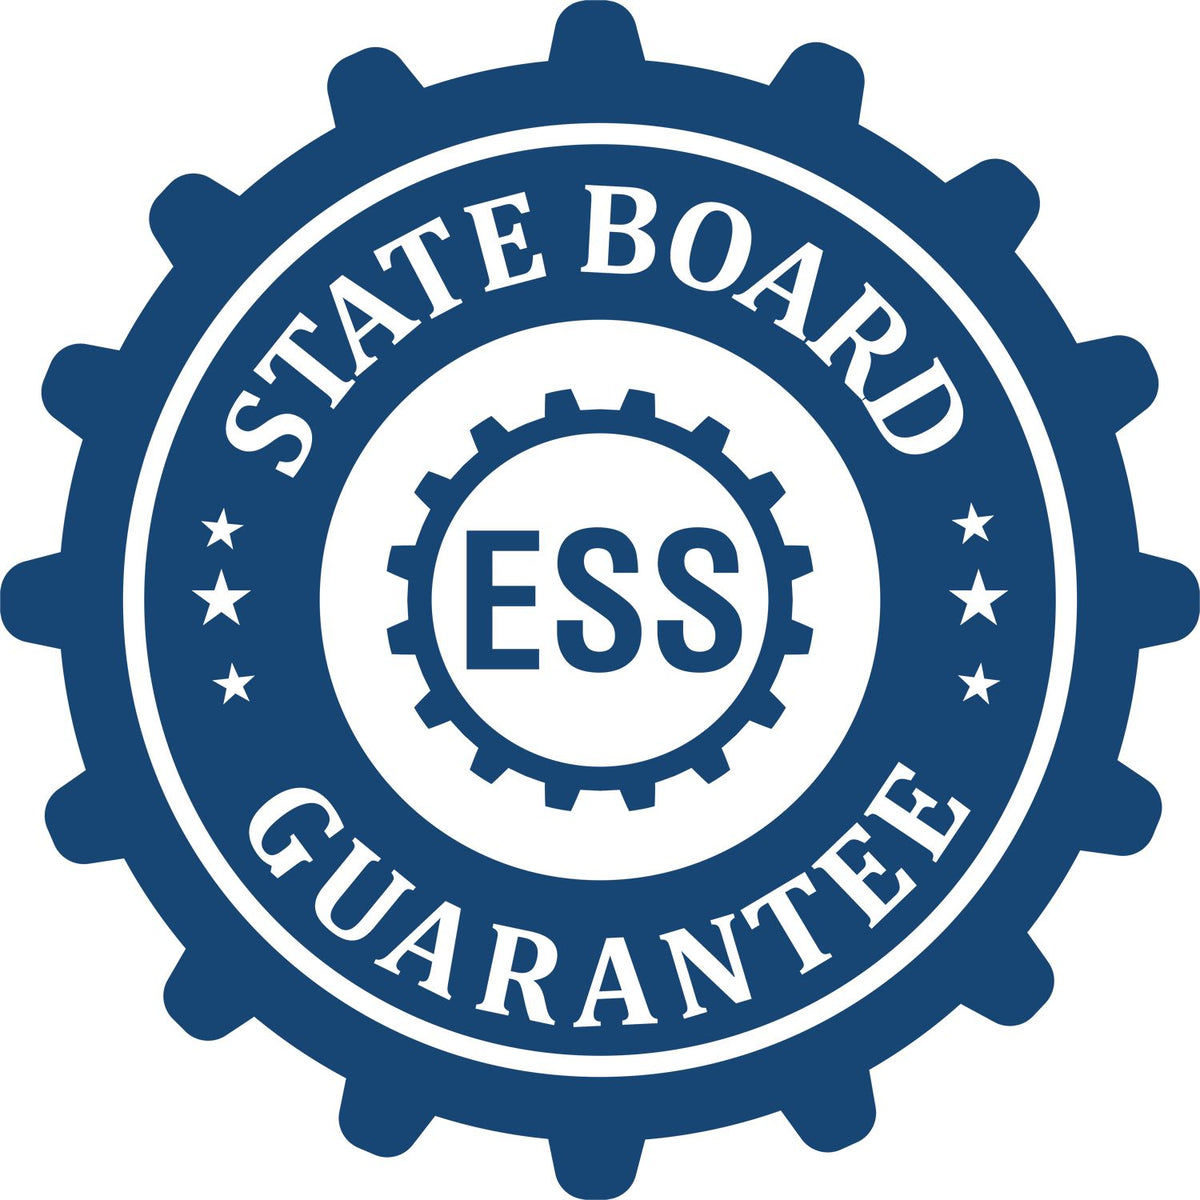 An emblem in a gear shape illustrating a state board guarantee for the State of Maine Extended Long Reach Engineer Seal product.